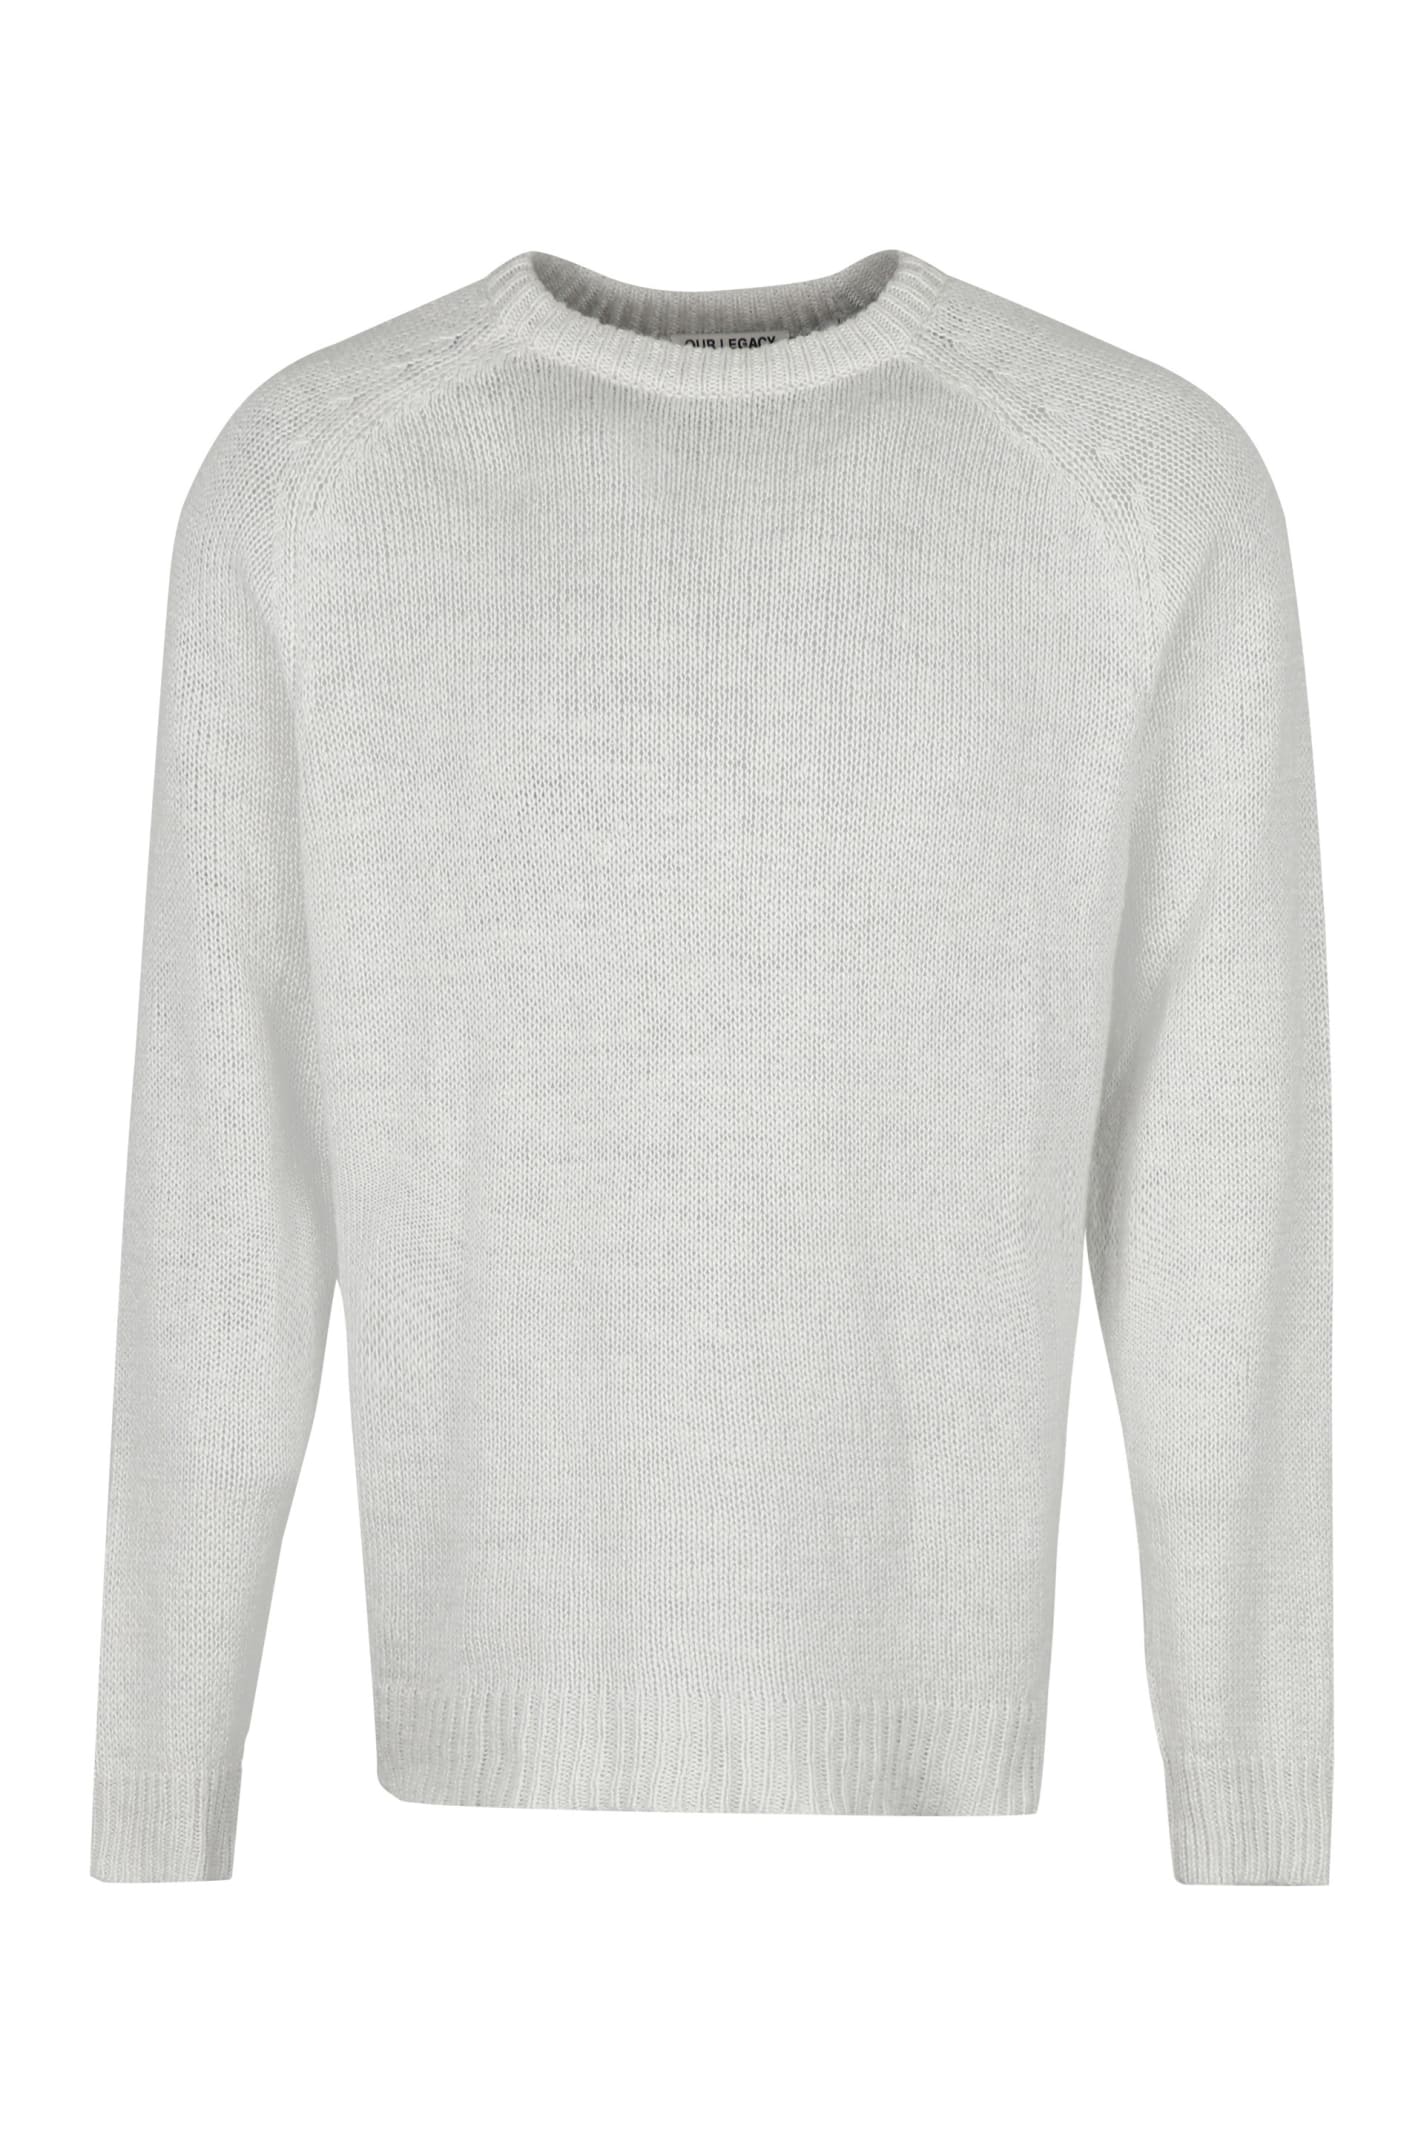 Our Legacy Knit Crew-neck Pullover